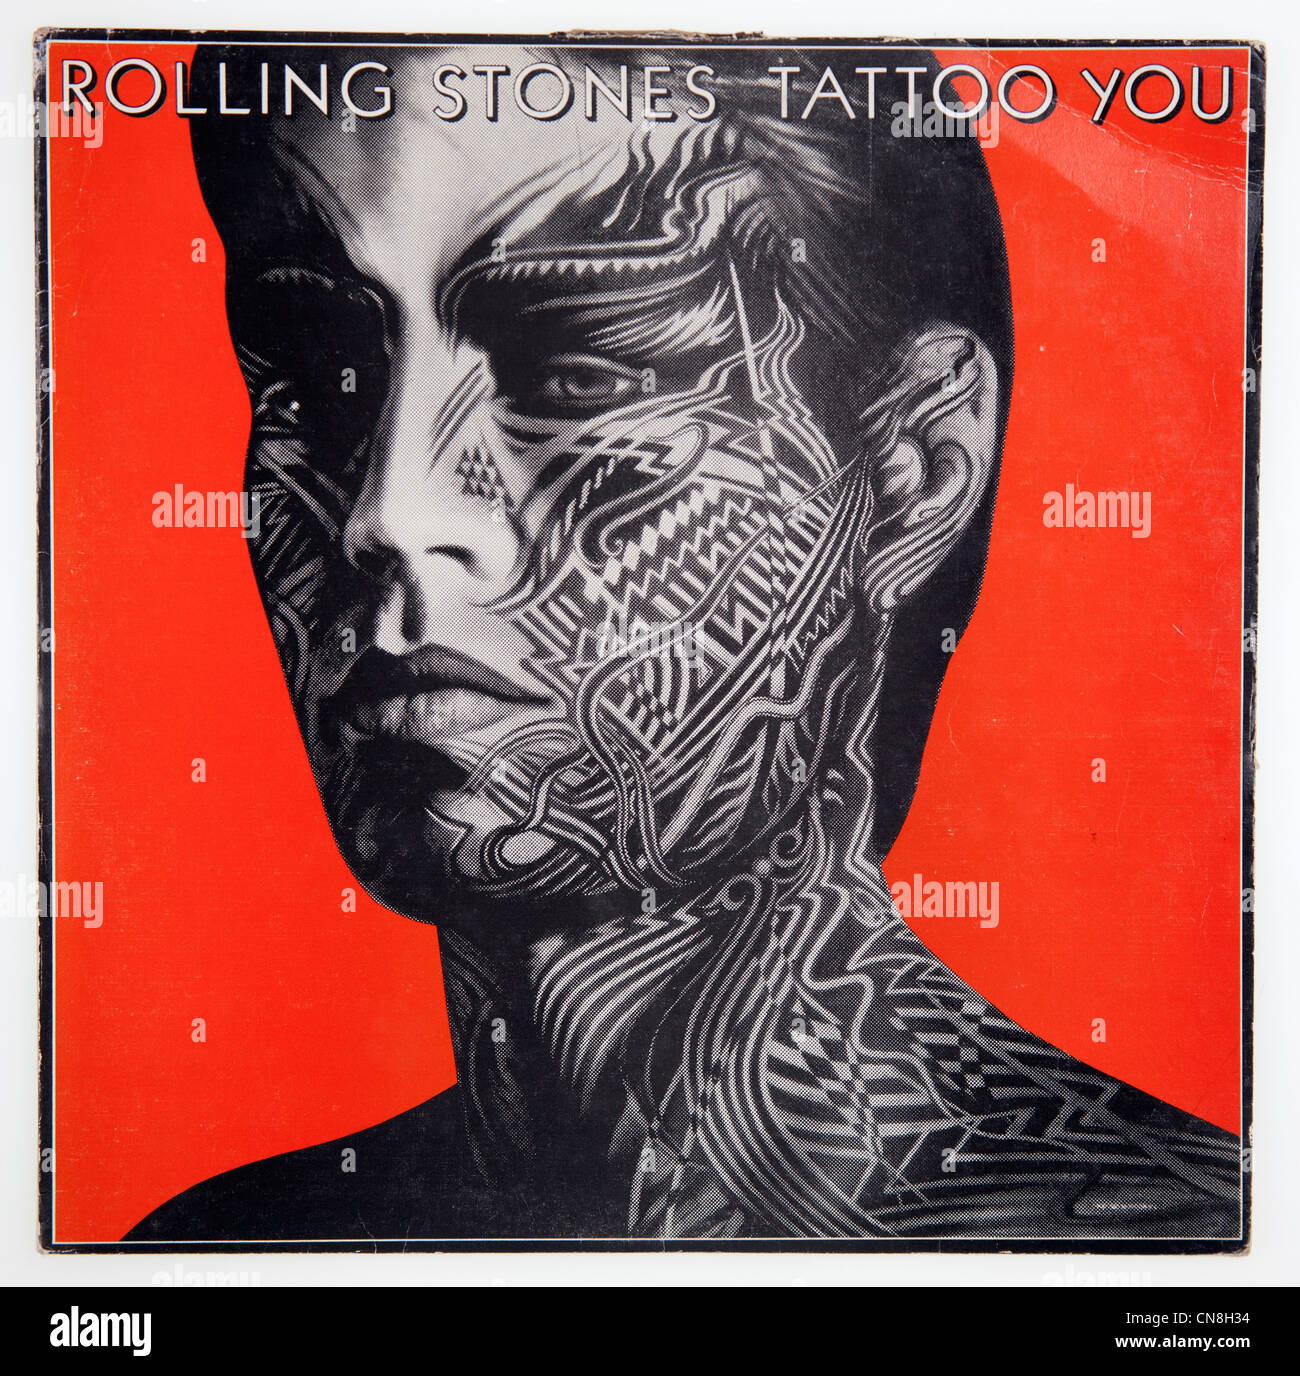 Cover of vinyl album Tattoo You by Rolling Stones, released 1981 on Virgin Records Stock Photo